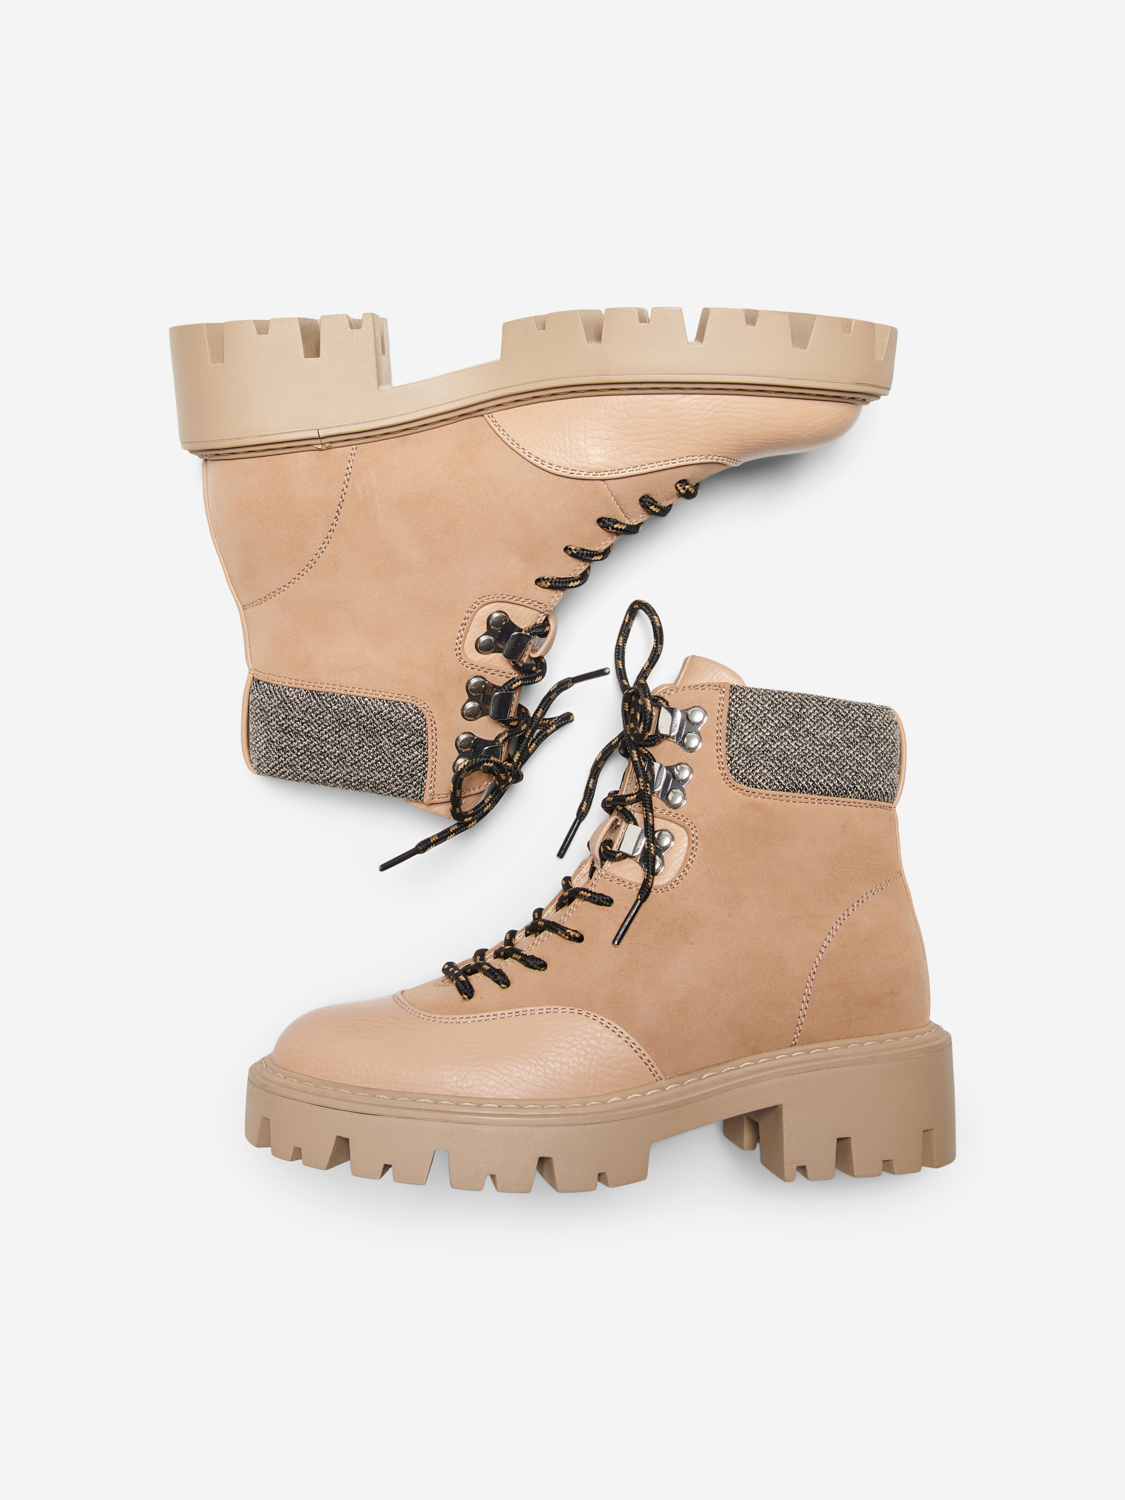 FINAL SALE - Betty faux leather lace-up boots, CAMEL, large